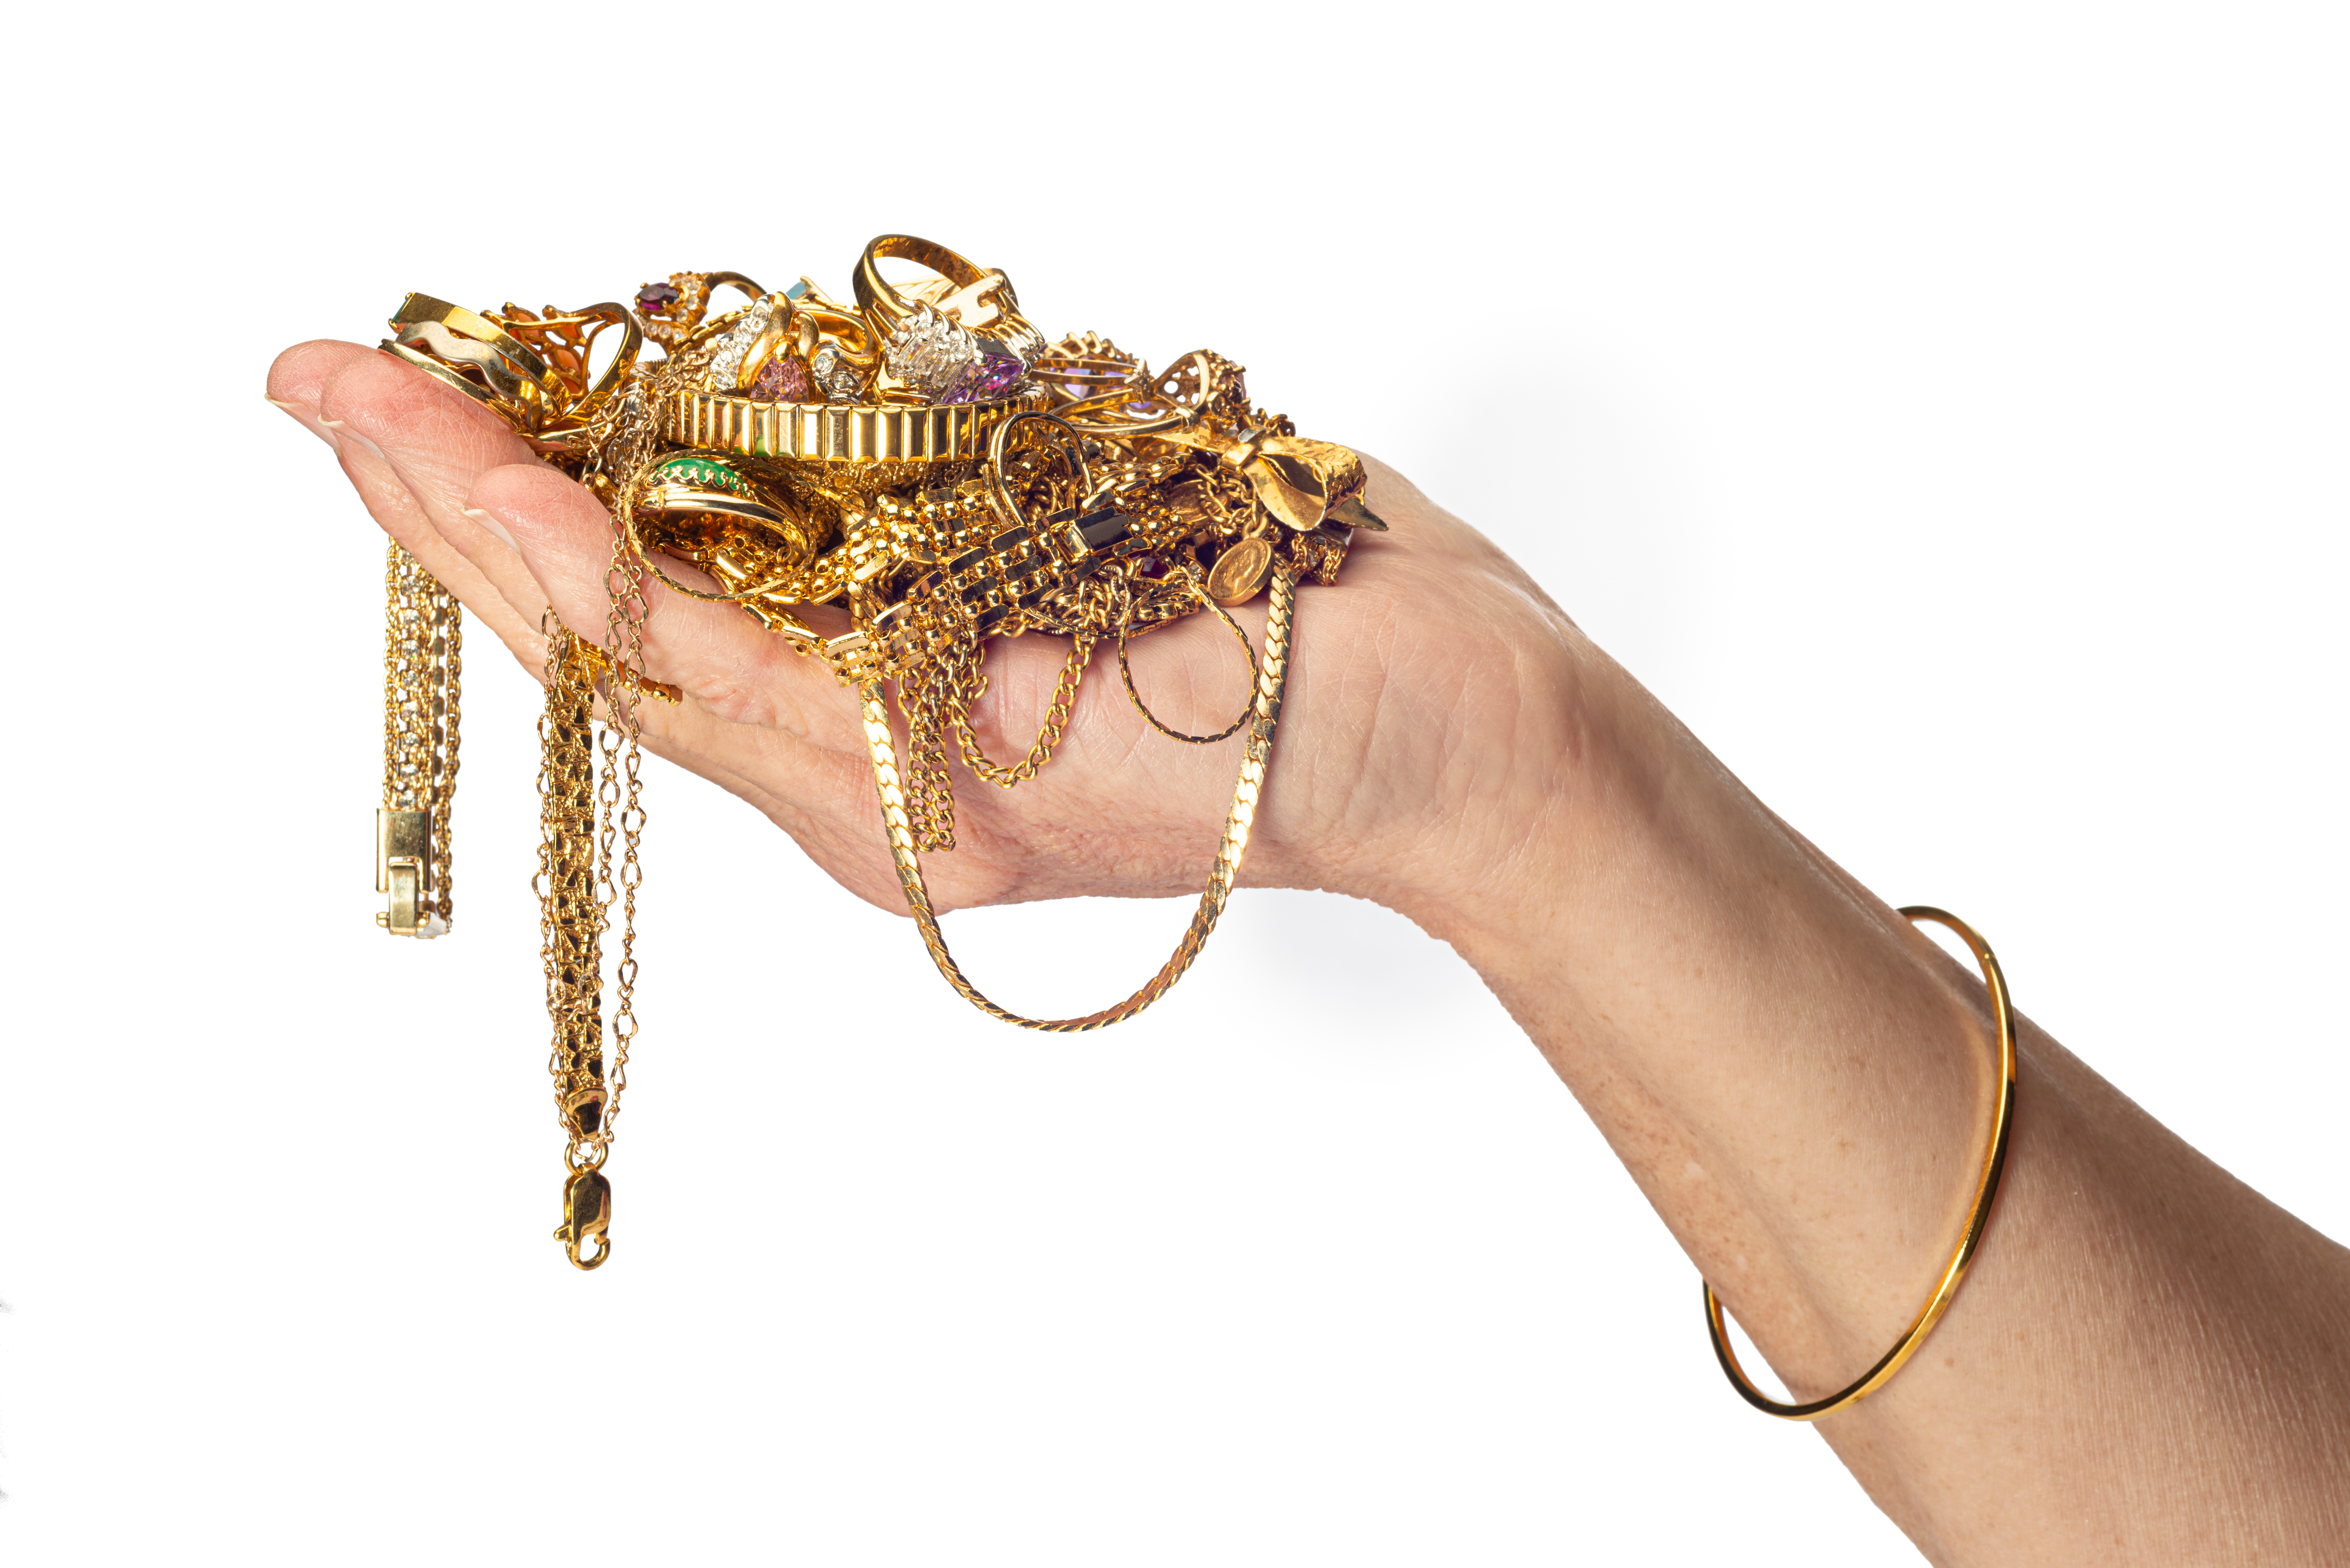 A hand holding gold jewelry | Source: Shutterstock